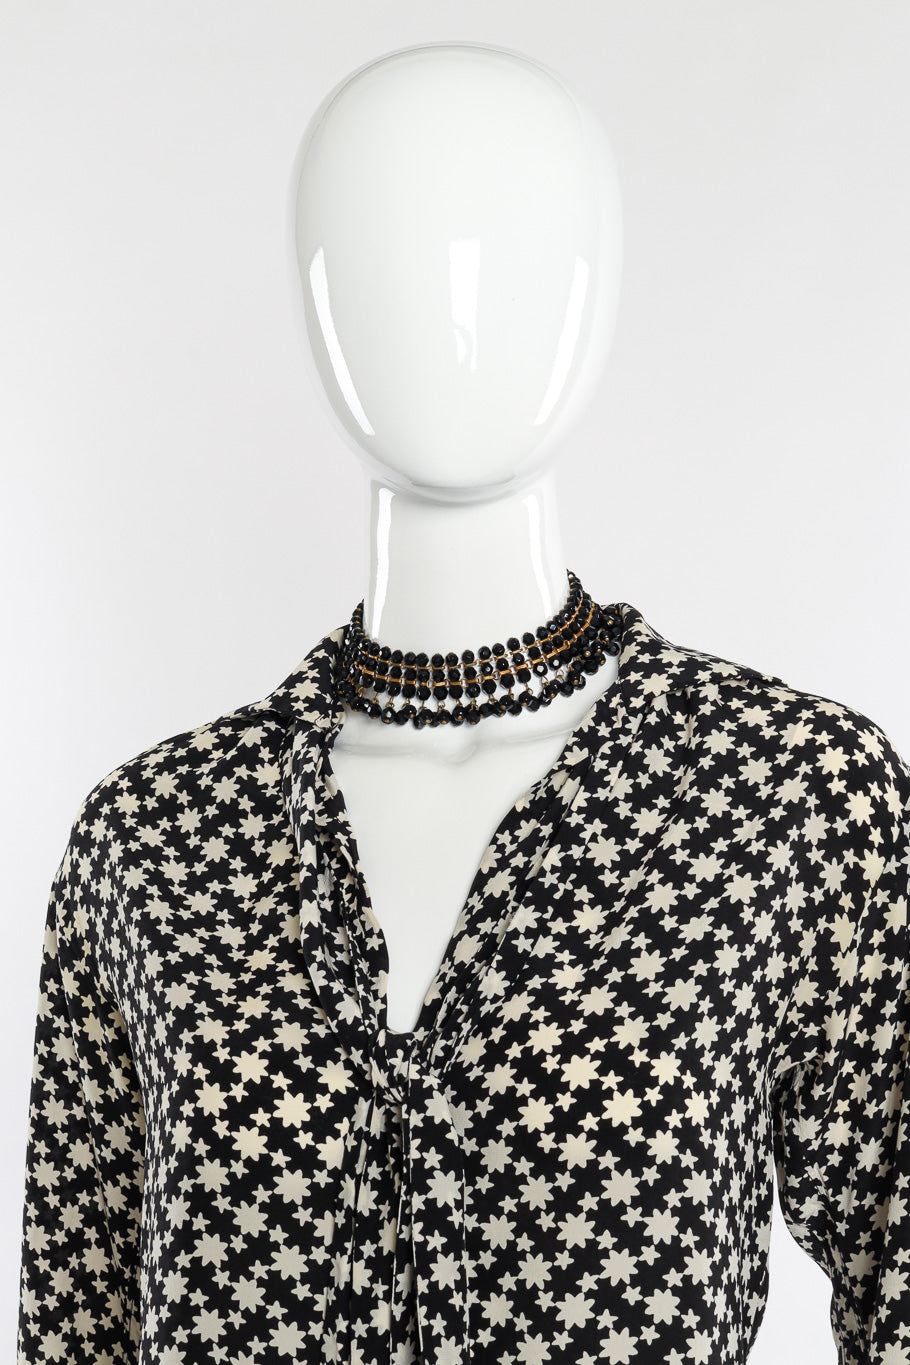 Vintage Beaded Fringe Collar Necklace on mannequin paired with Gucci star print blouse @Recessla